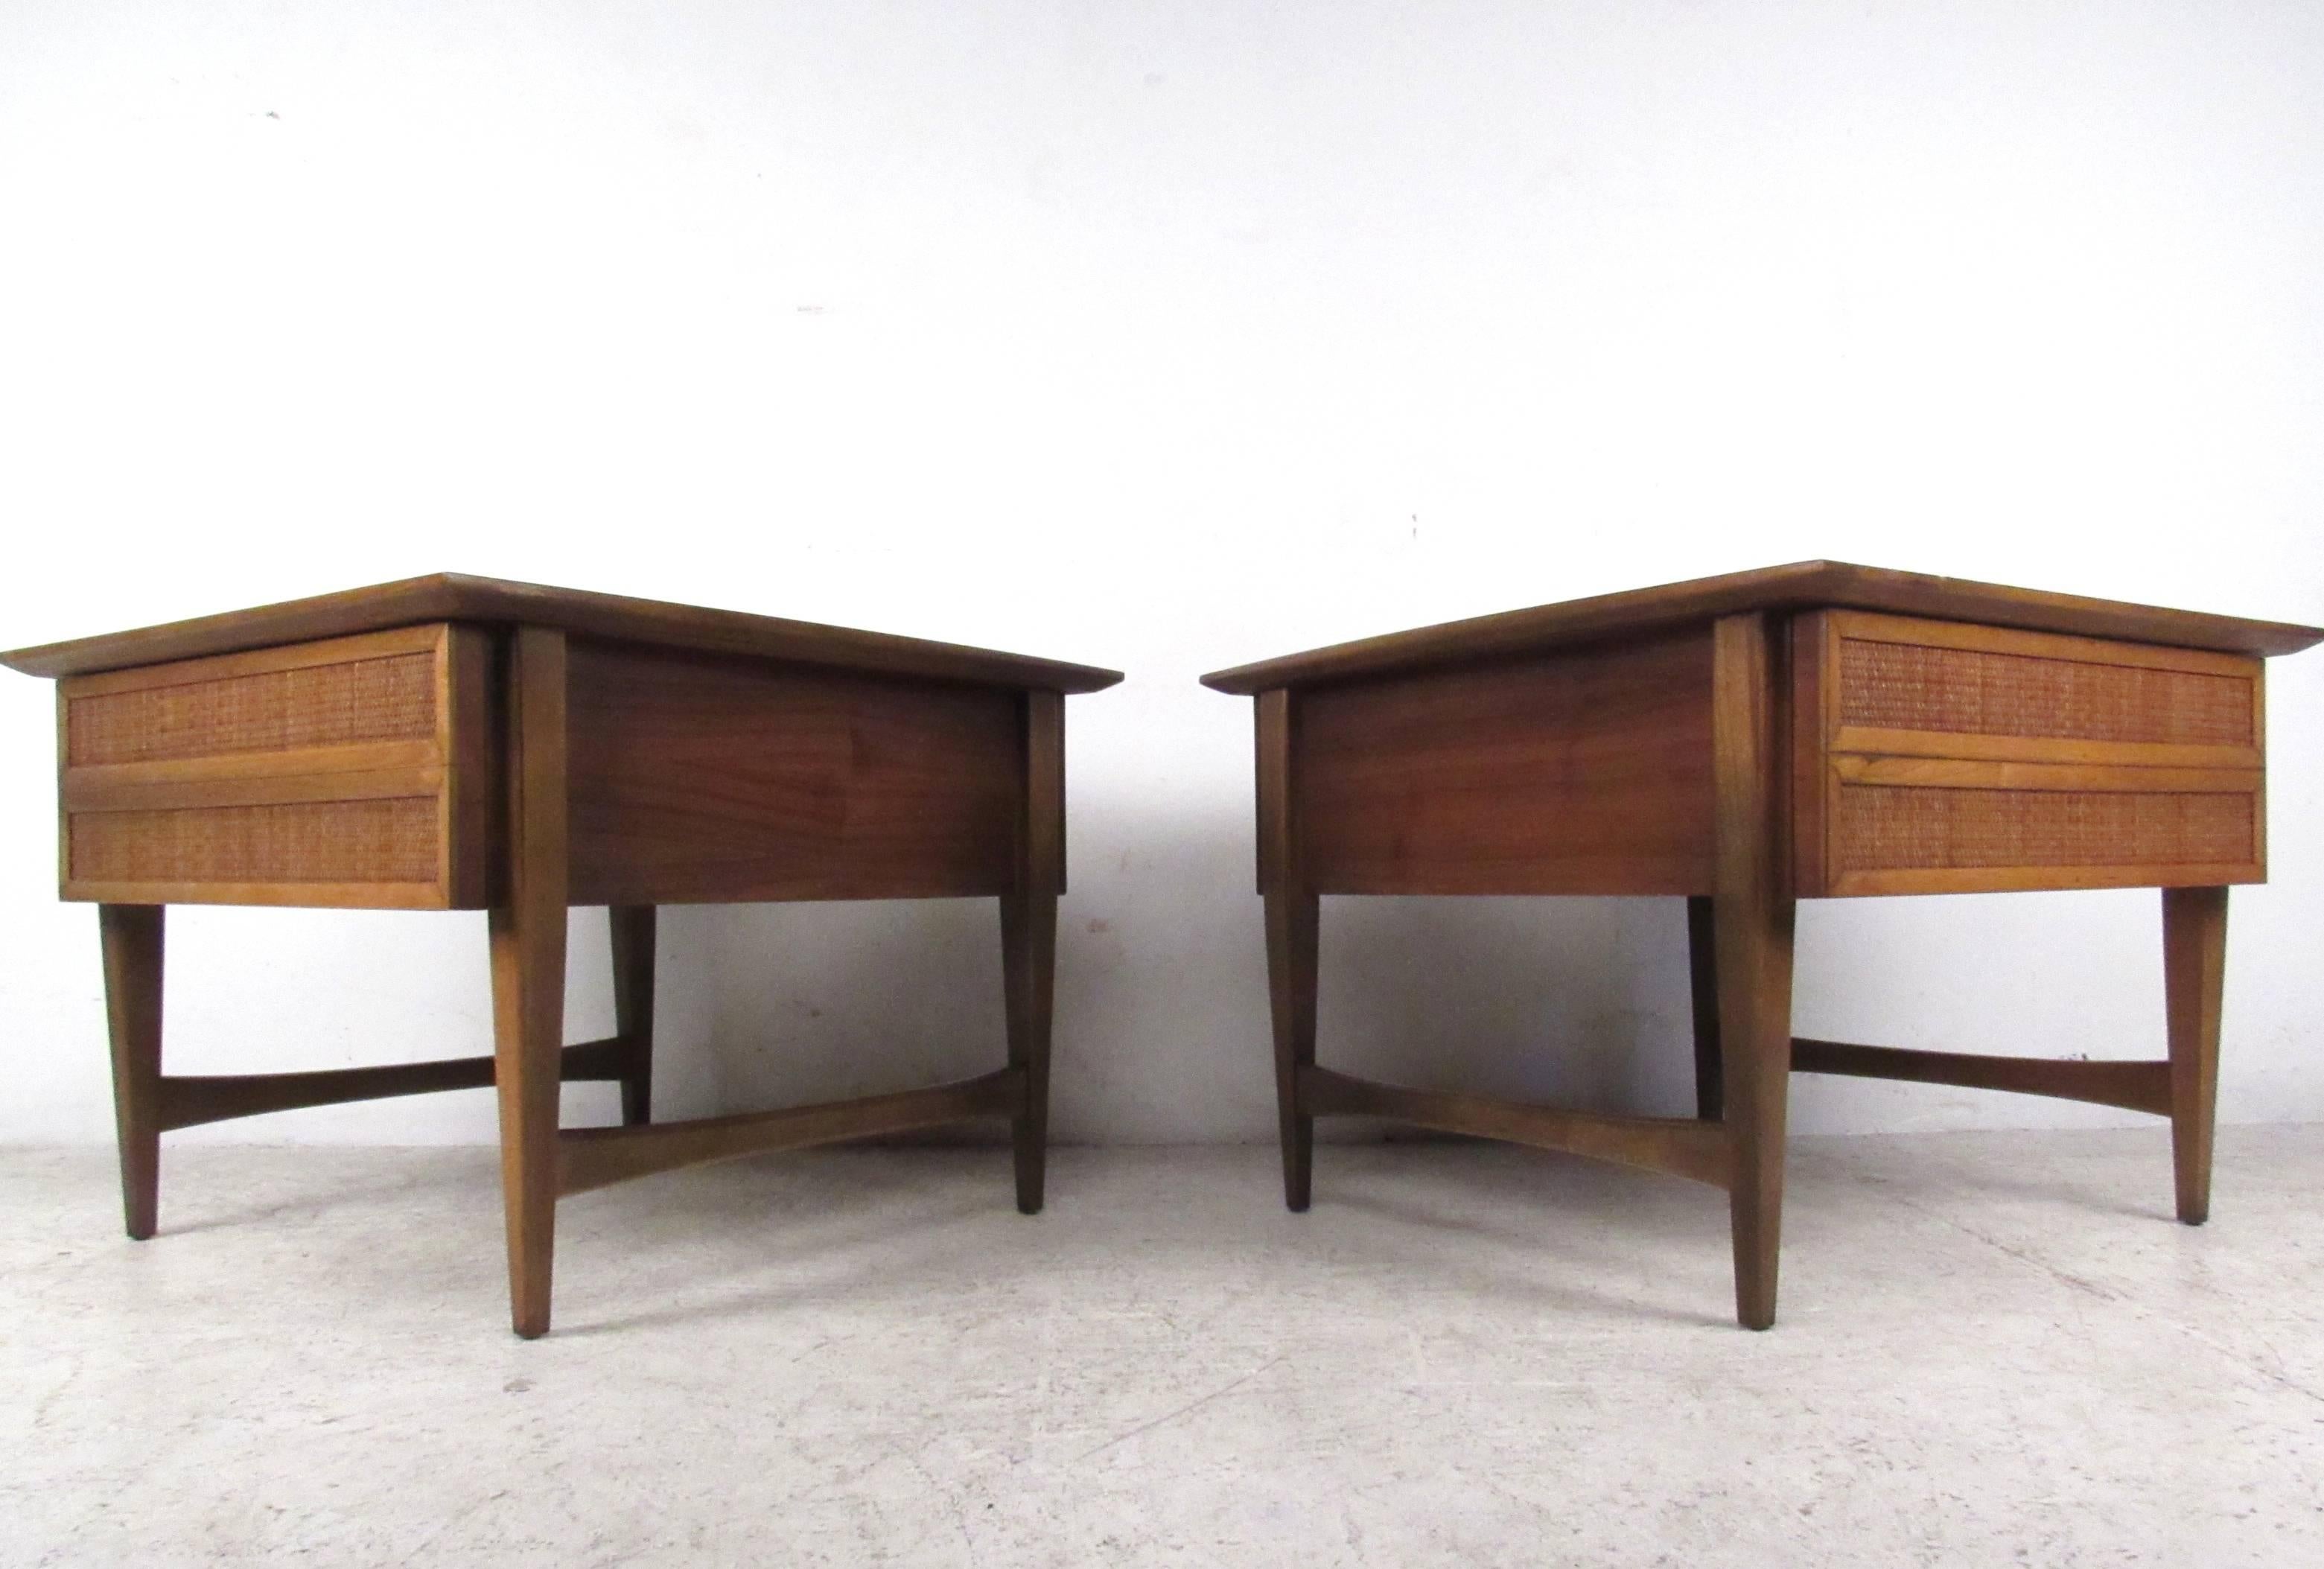 This vintage pair of cane front end tables by Lane Furniture offer spacious storage, stylish tapered legs and a unique Mid-Century aesthetic. Perfect side tables for any interior; please confirm item location (NY or NJ).